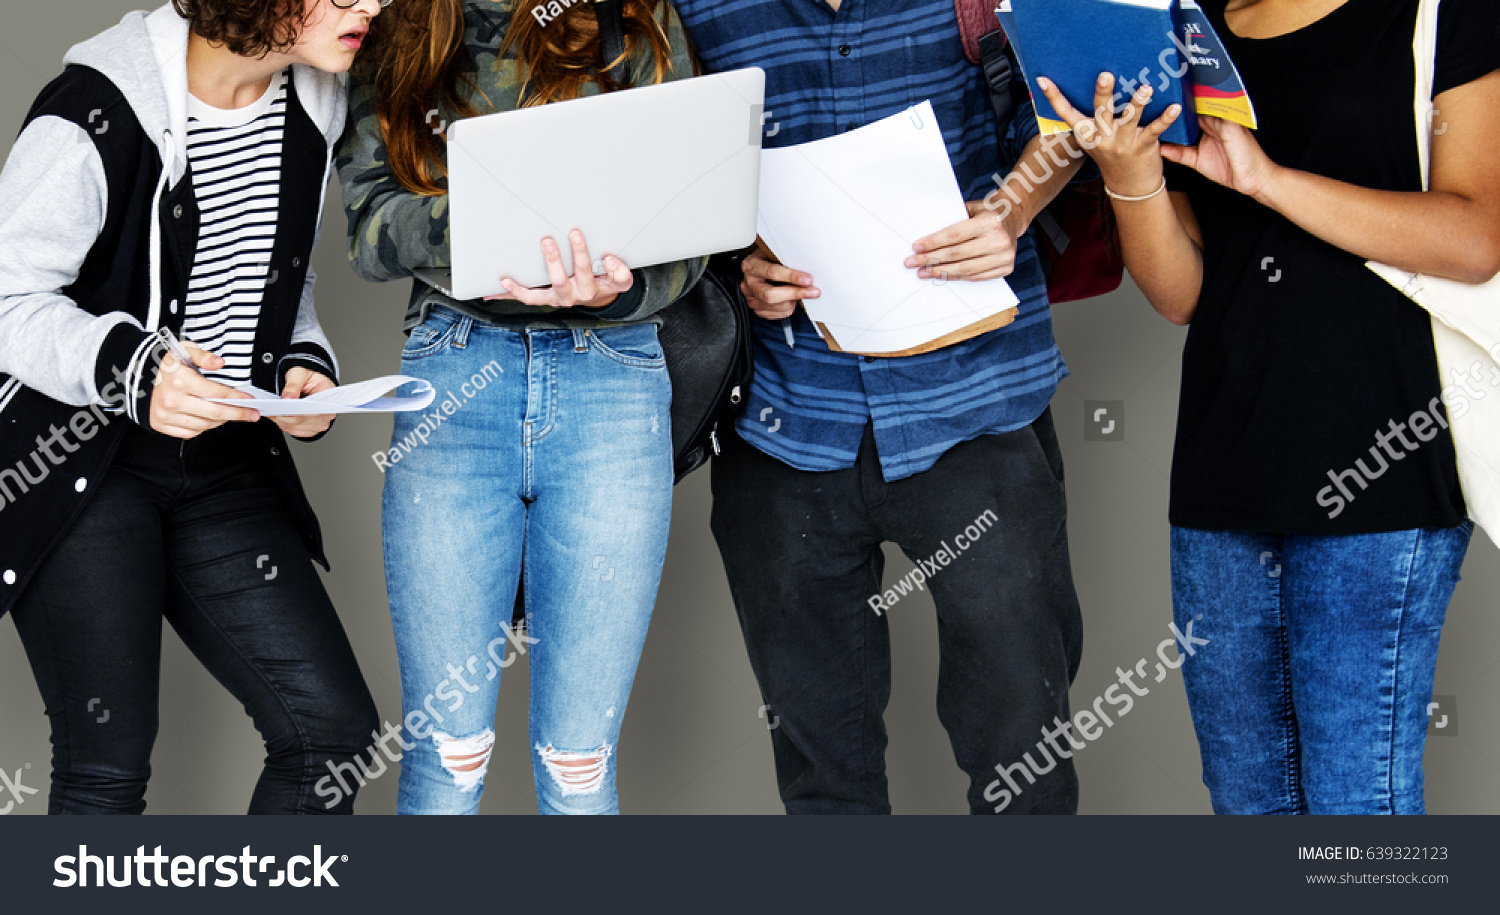 Group of Diverse High School Students Using Digital Devices Studio Portrait #639322123